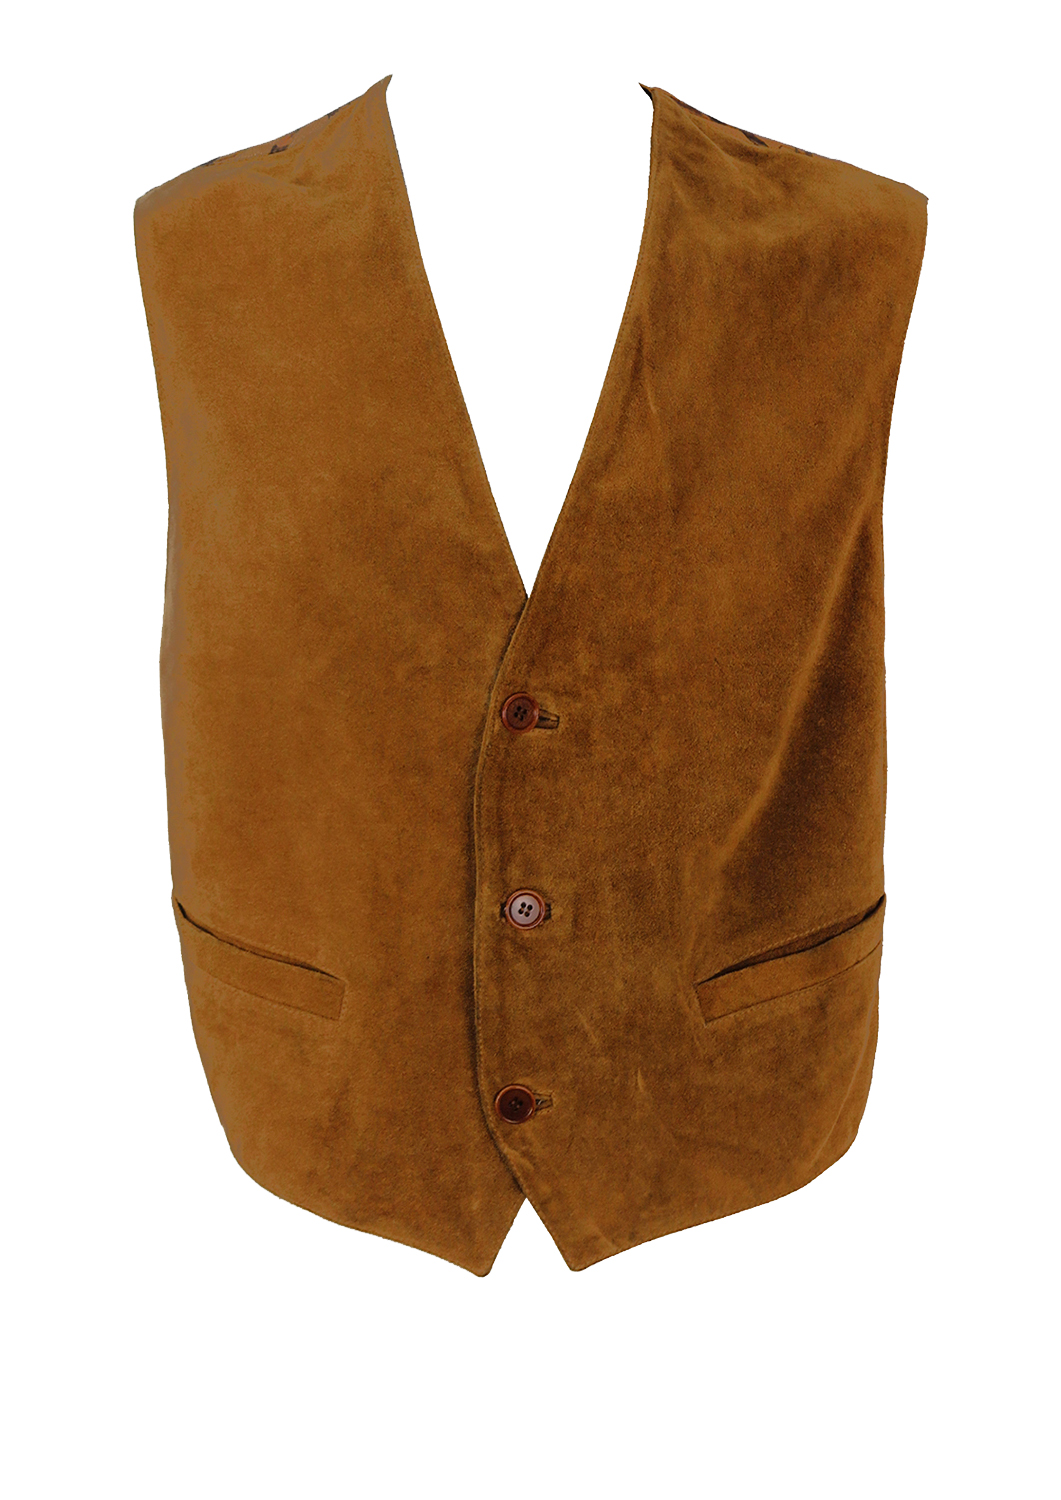 Camel Coloured Suede Waistcoat with Equestrian Pattern - M/L